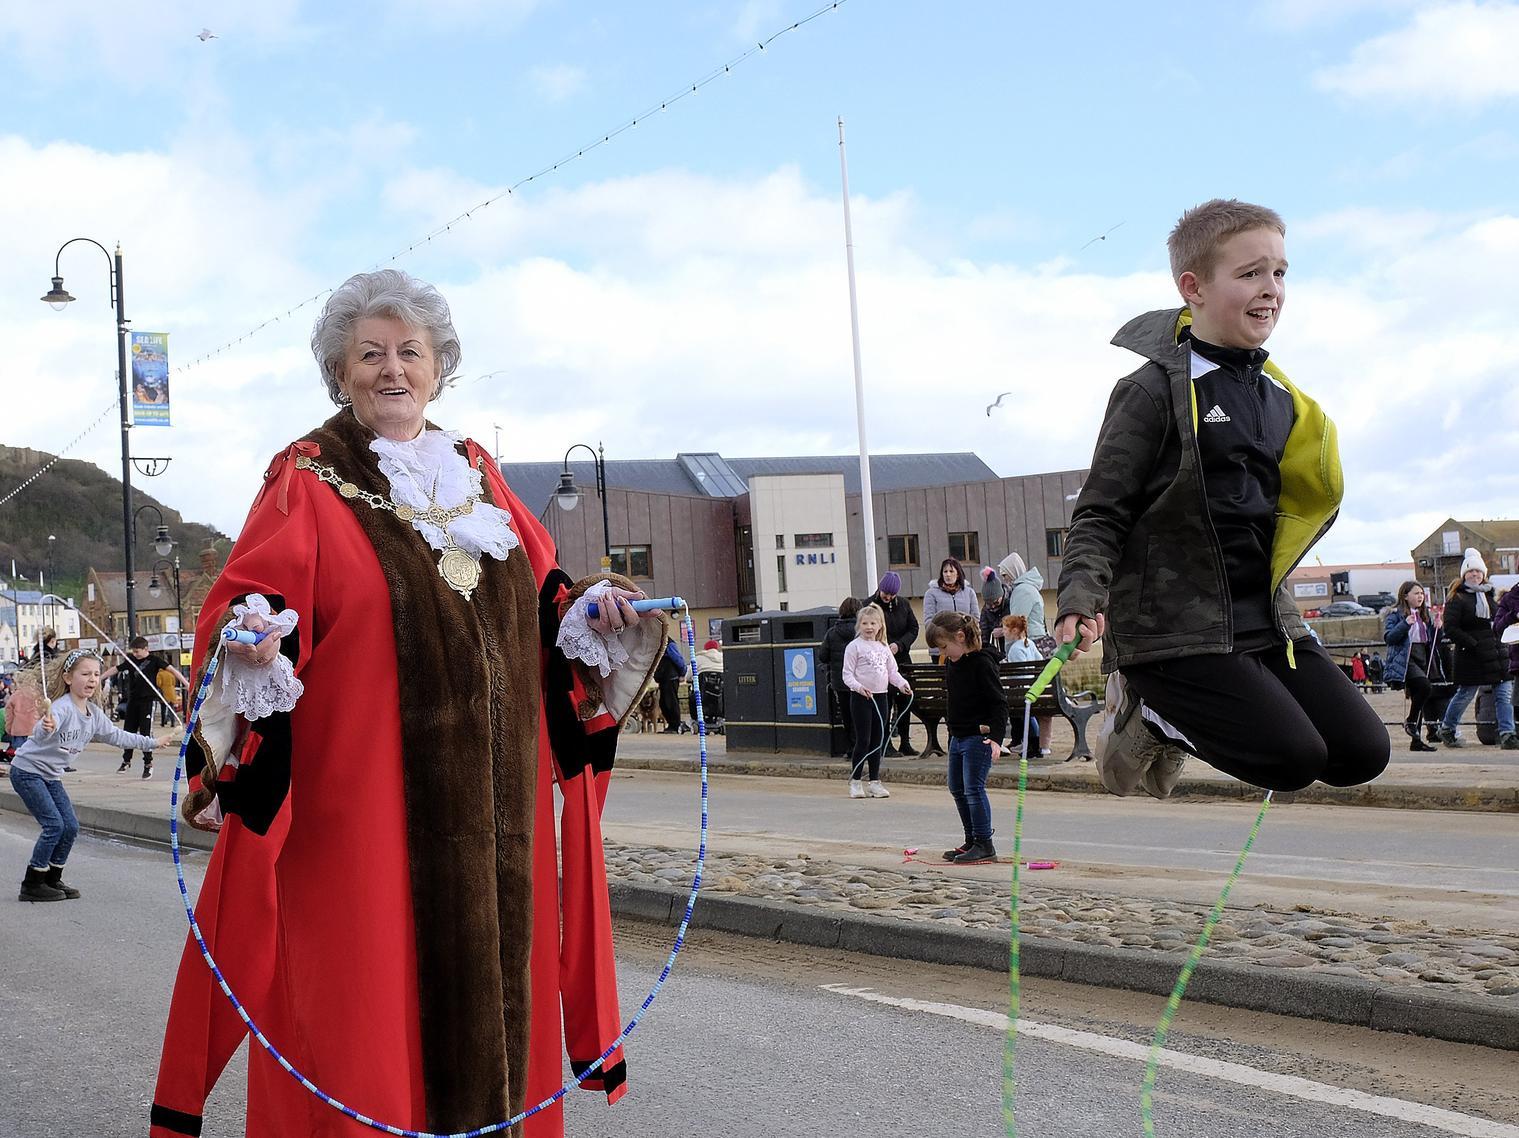 Mayor Hazel Lynskey takes part in skipping day with youngster Mitchell England.